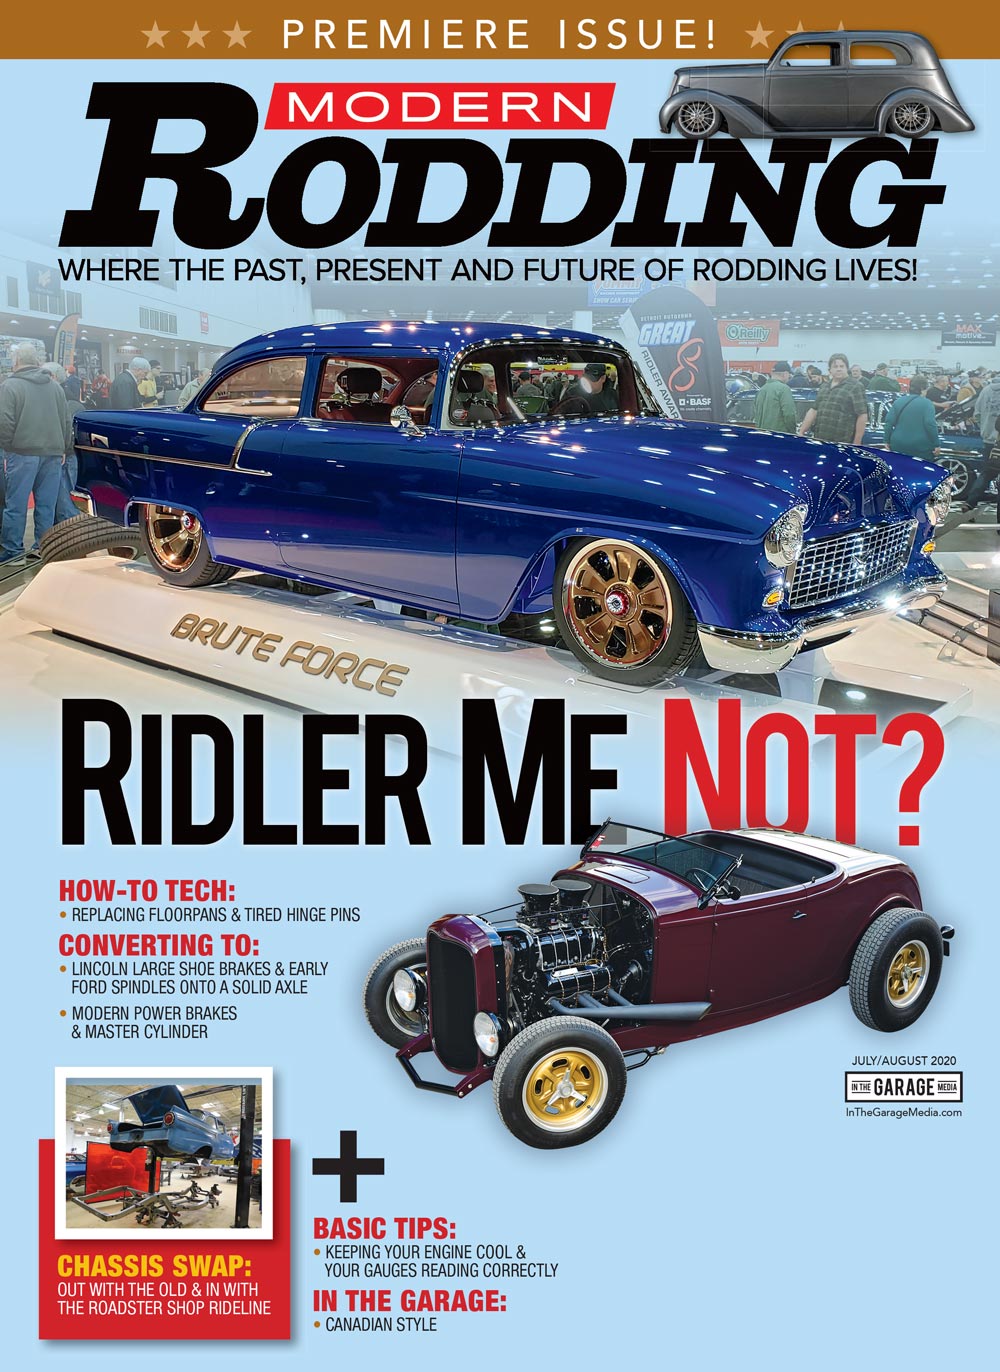 Modern Rodding July/August 2020 cover